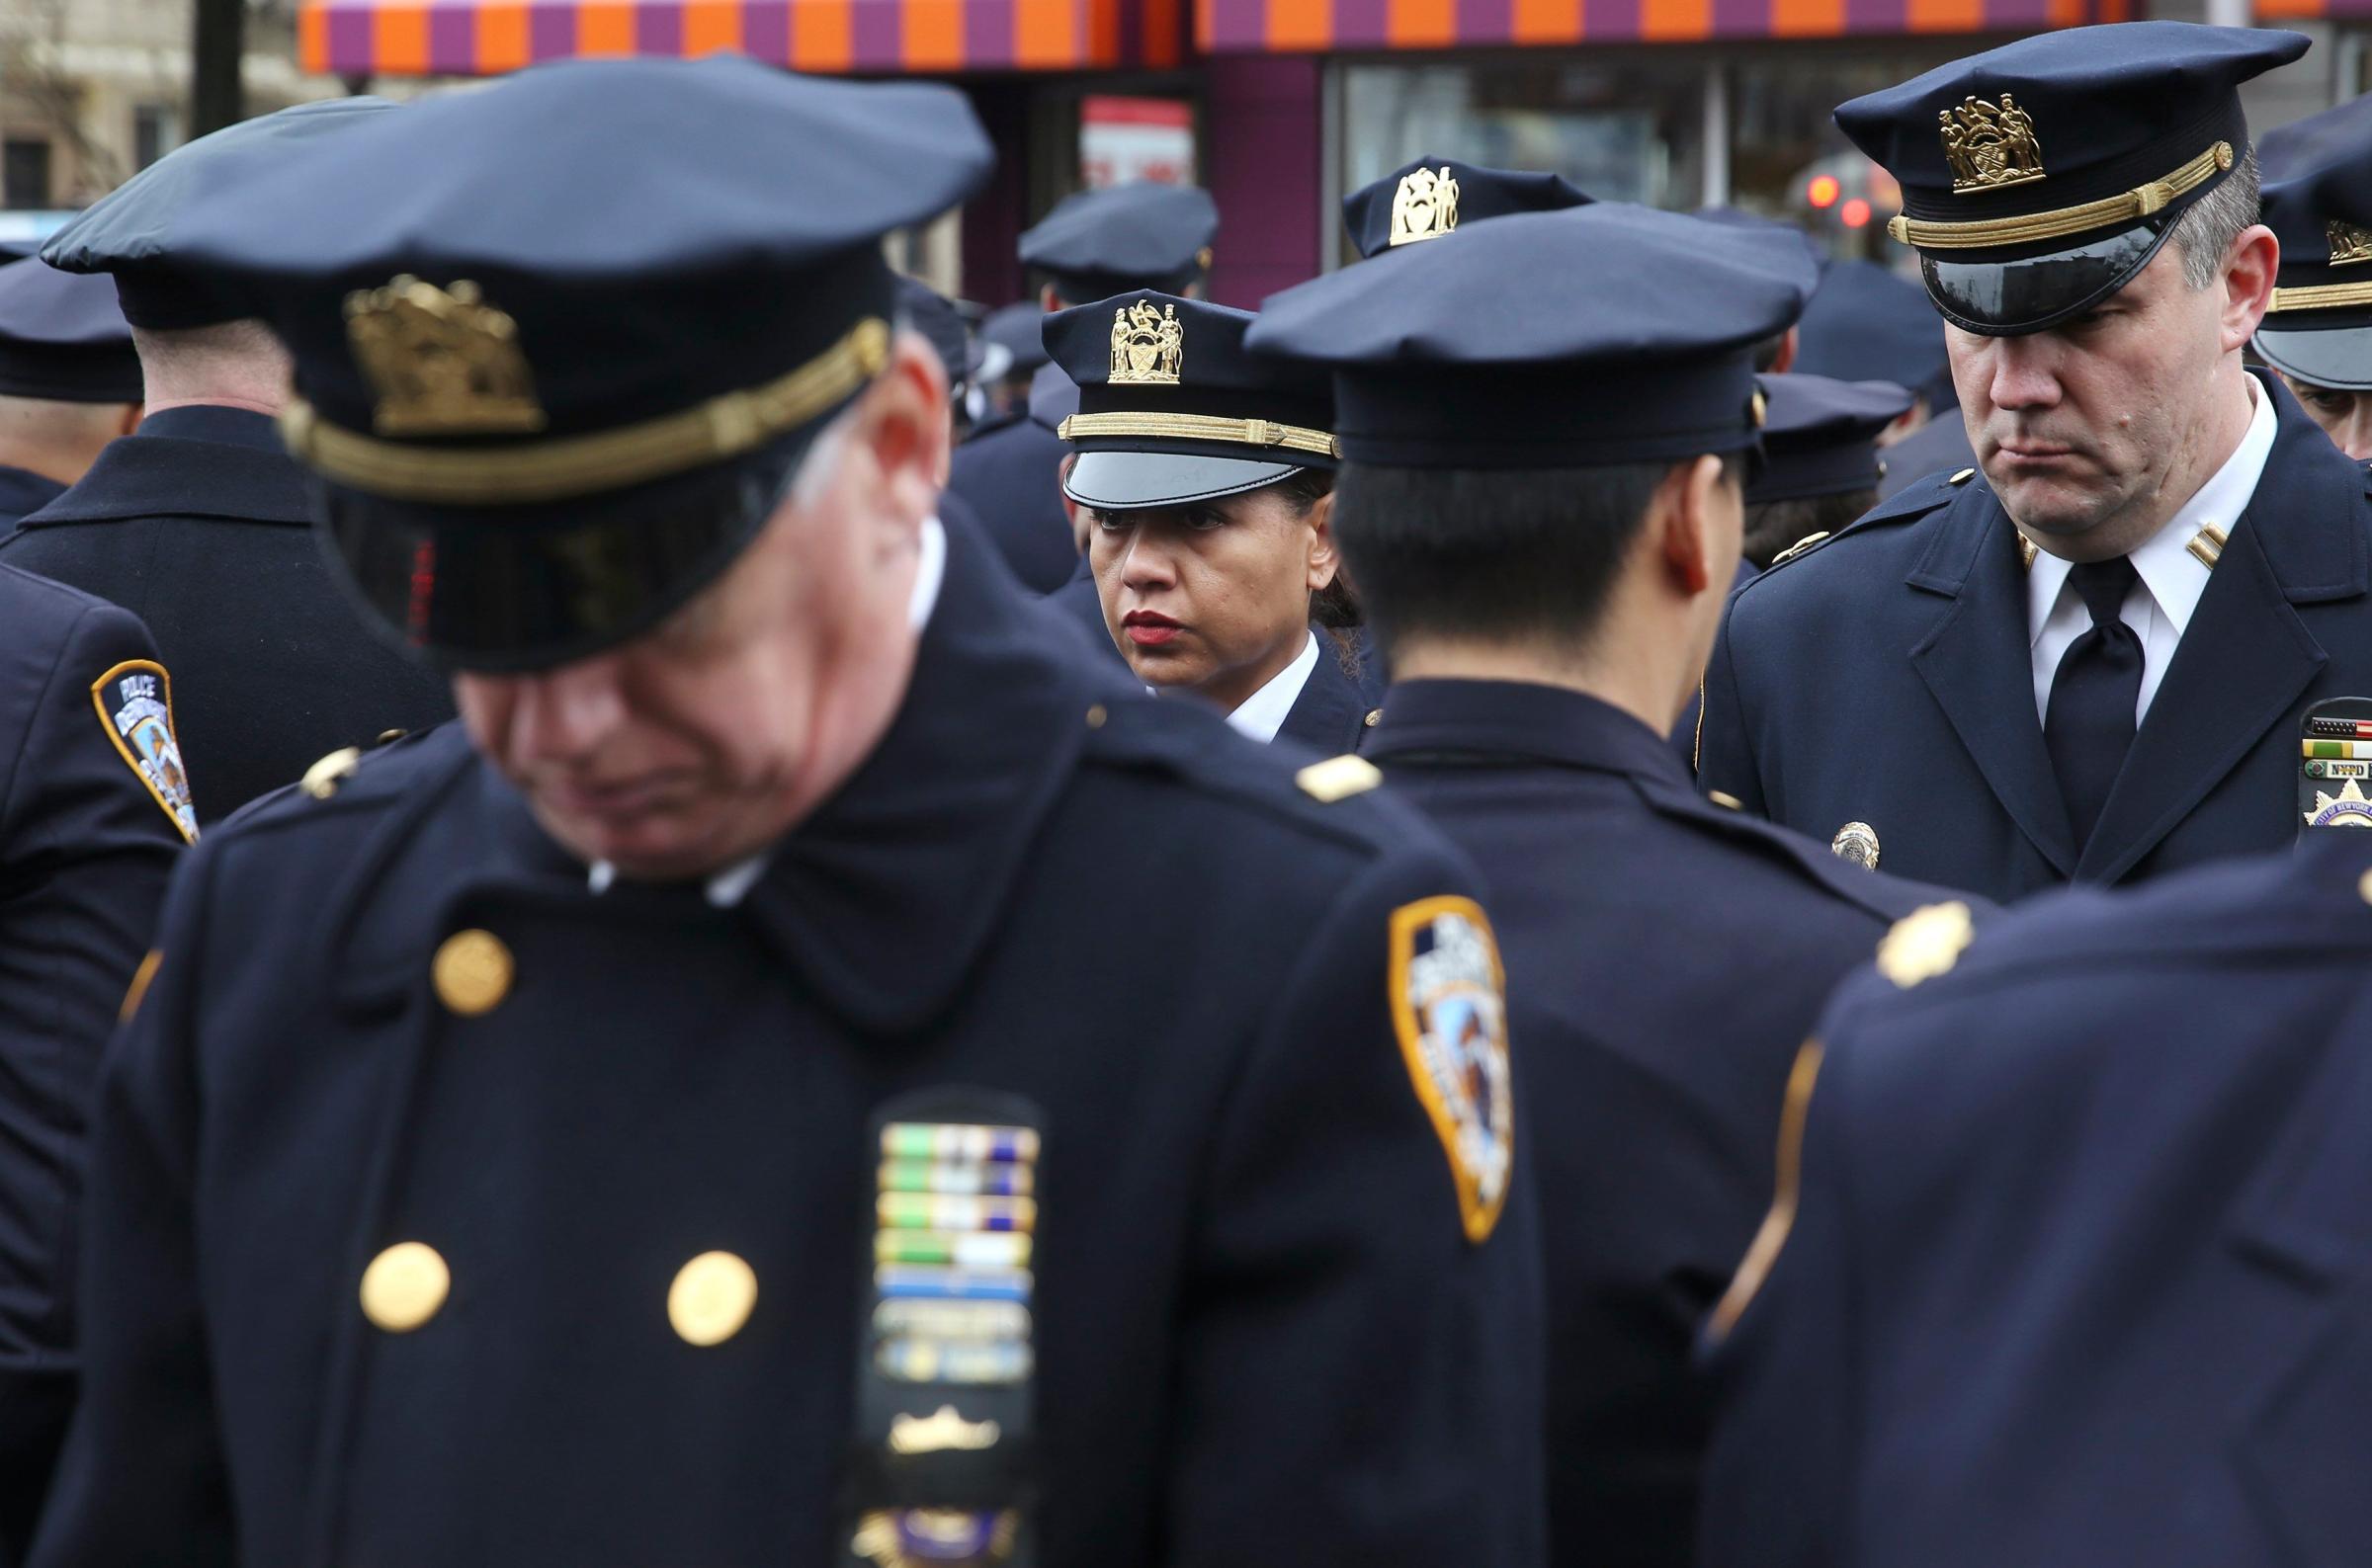 Law enforcement officers stand, with some turning their backs, as New York City Mayor Bill de Blasio speaks on a monitor outside the funeral for NYPD officer Wenjian Liu in the Brooklyn borough of New York